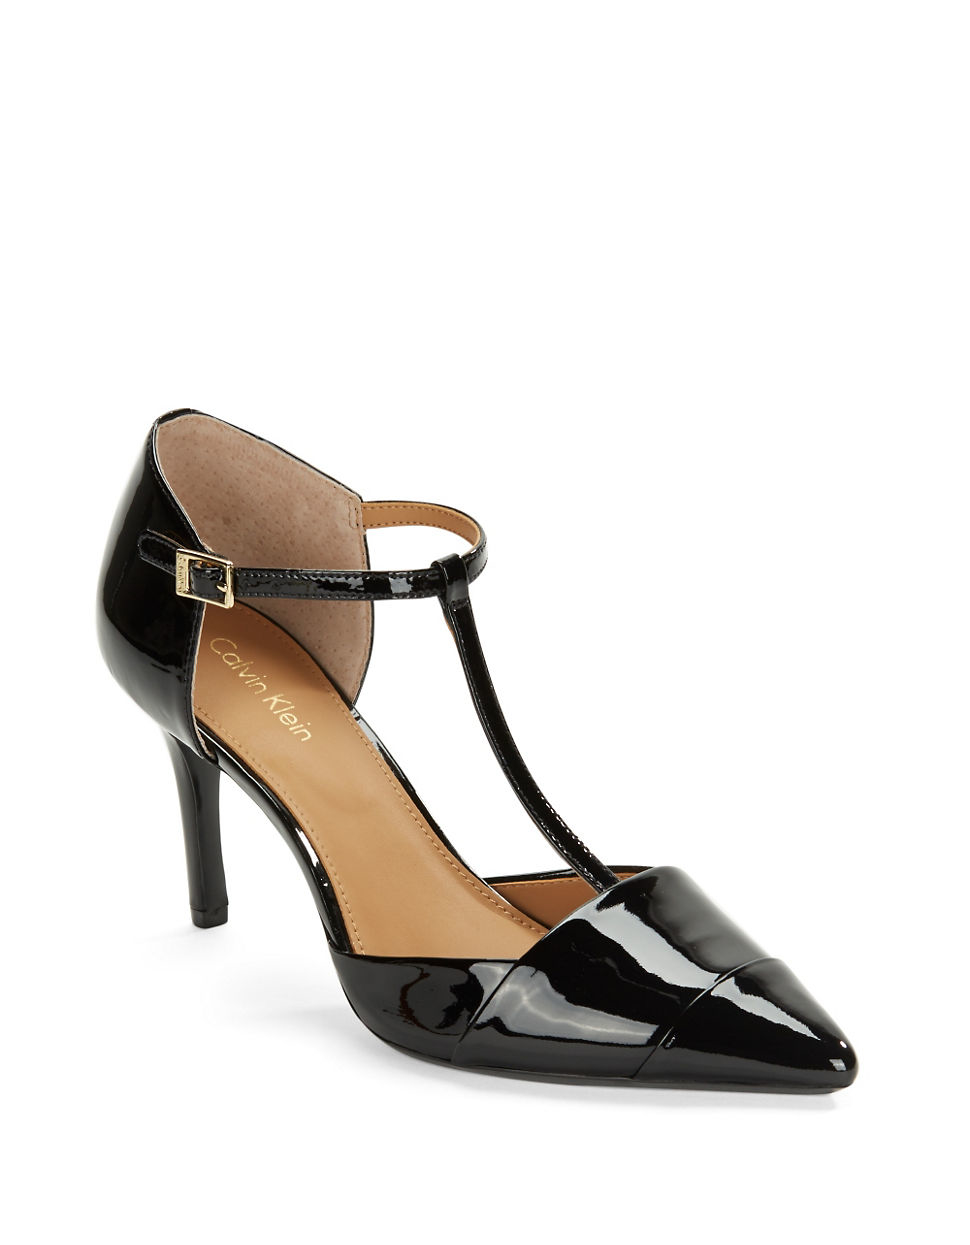 Calvin Klein Ginae Patent Leather T-strap Pumps in Black - Lyst